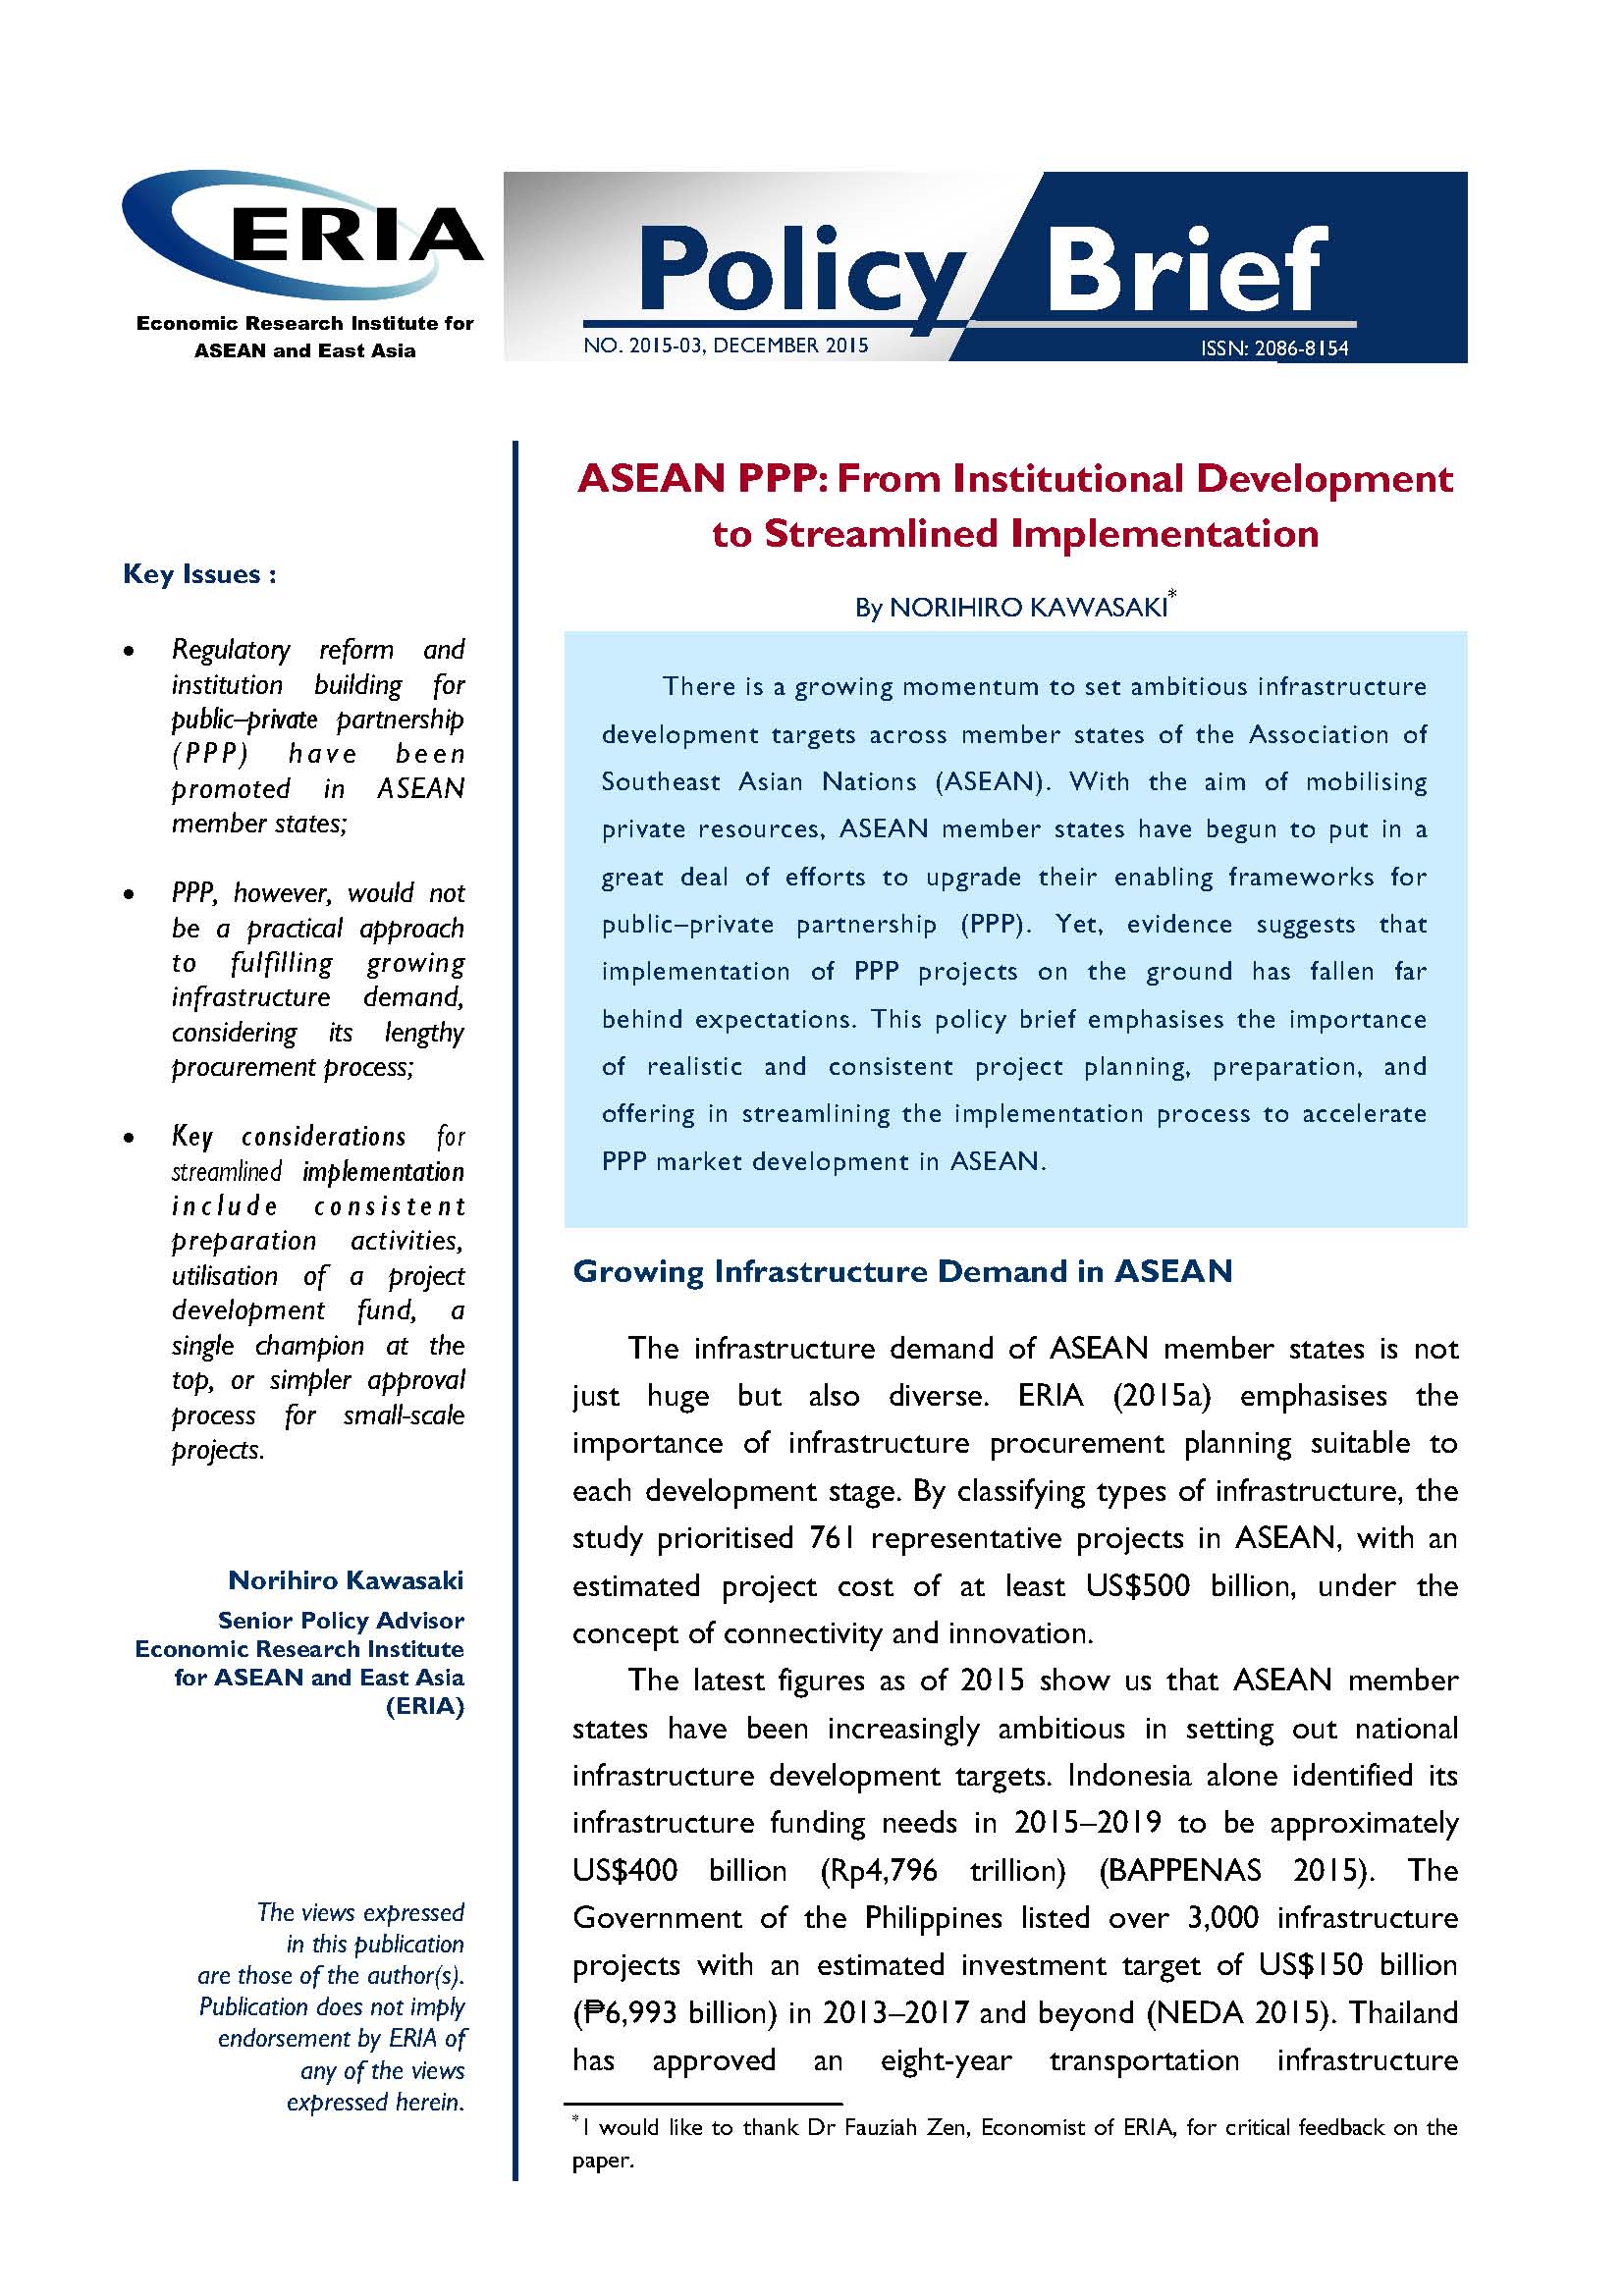 ASEAN PPP: From Institutional Development to Streamlined Implementation